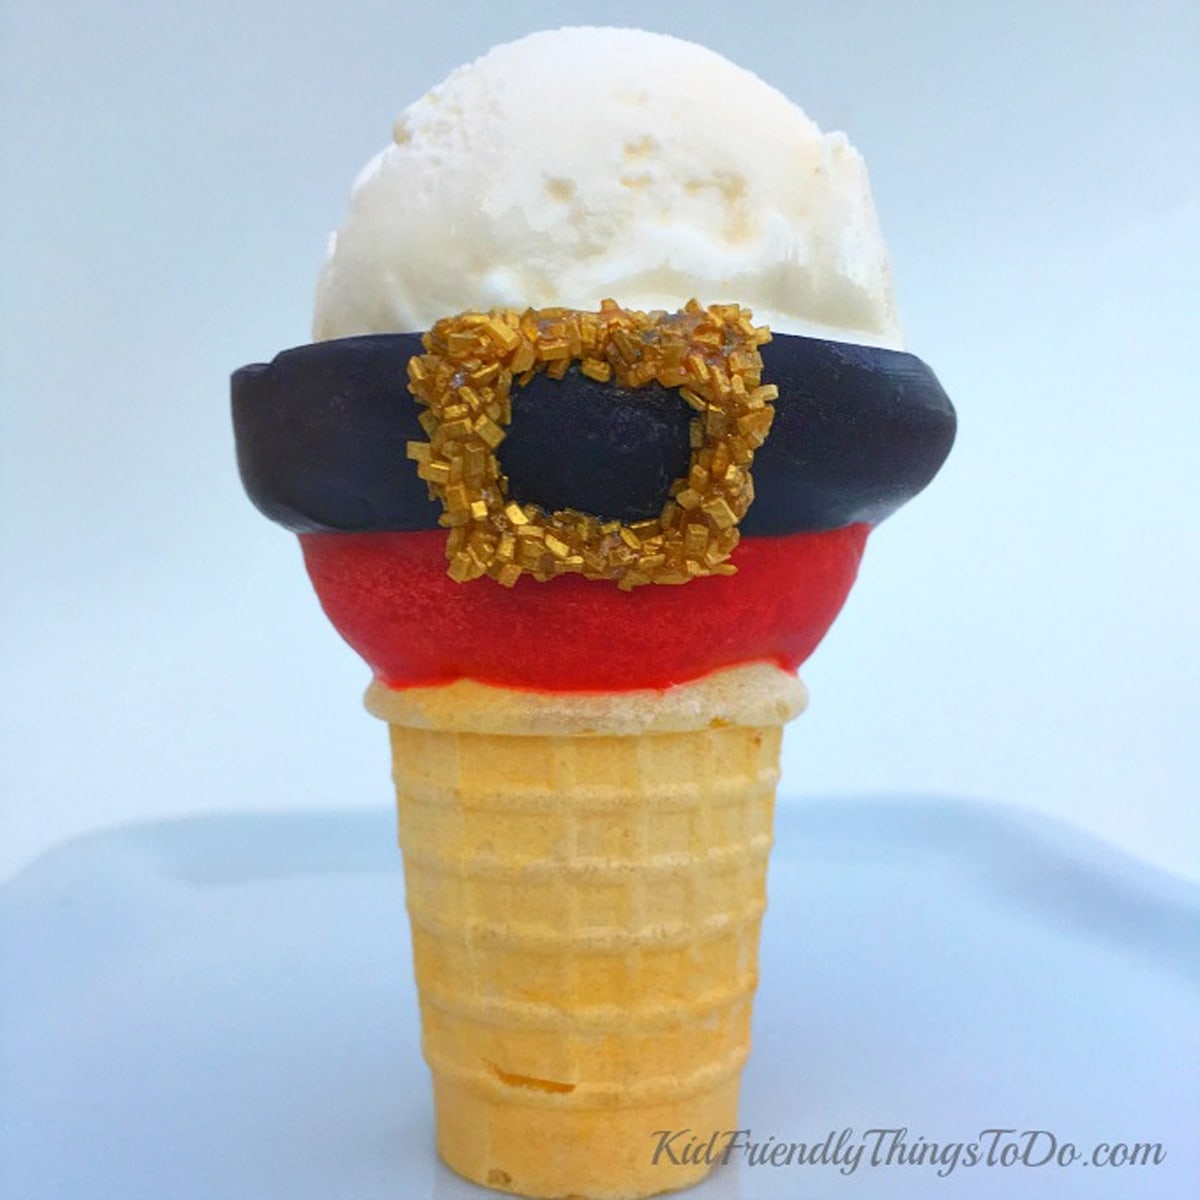 chocolate-dipped ice cream cone Santa suit filled with a scoop of vanilla ice cream